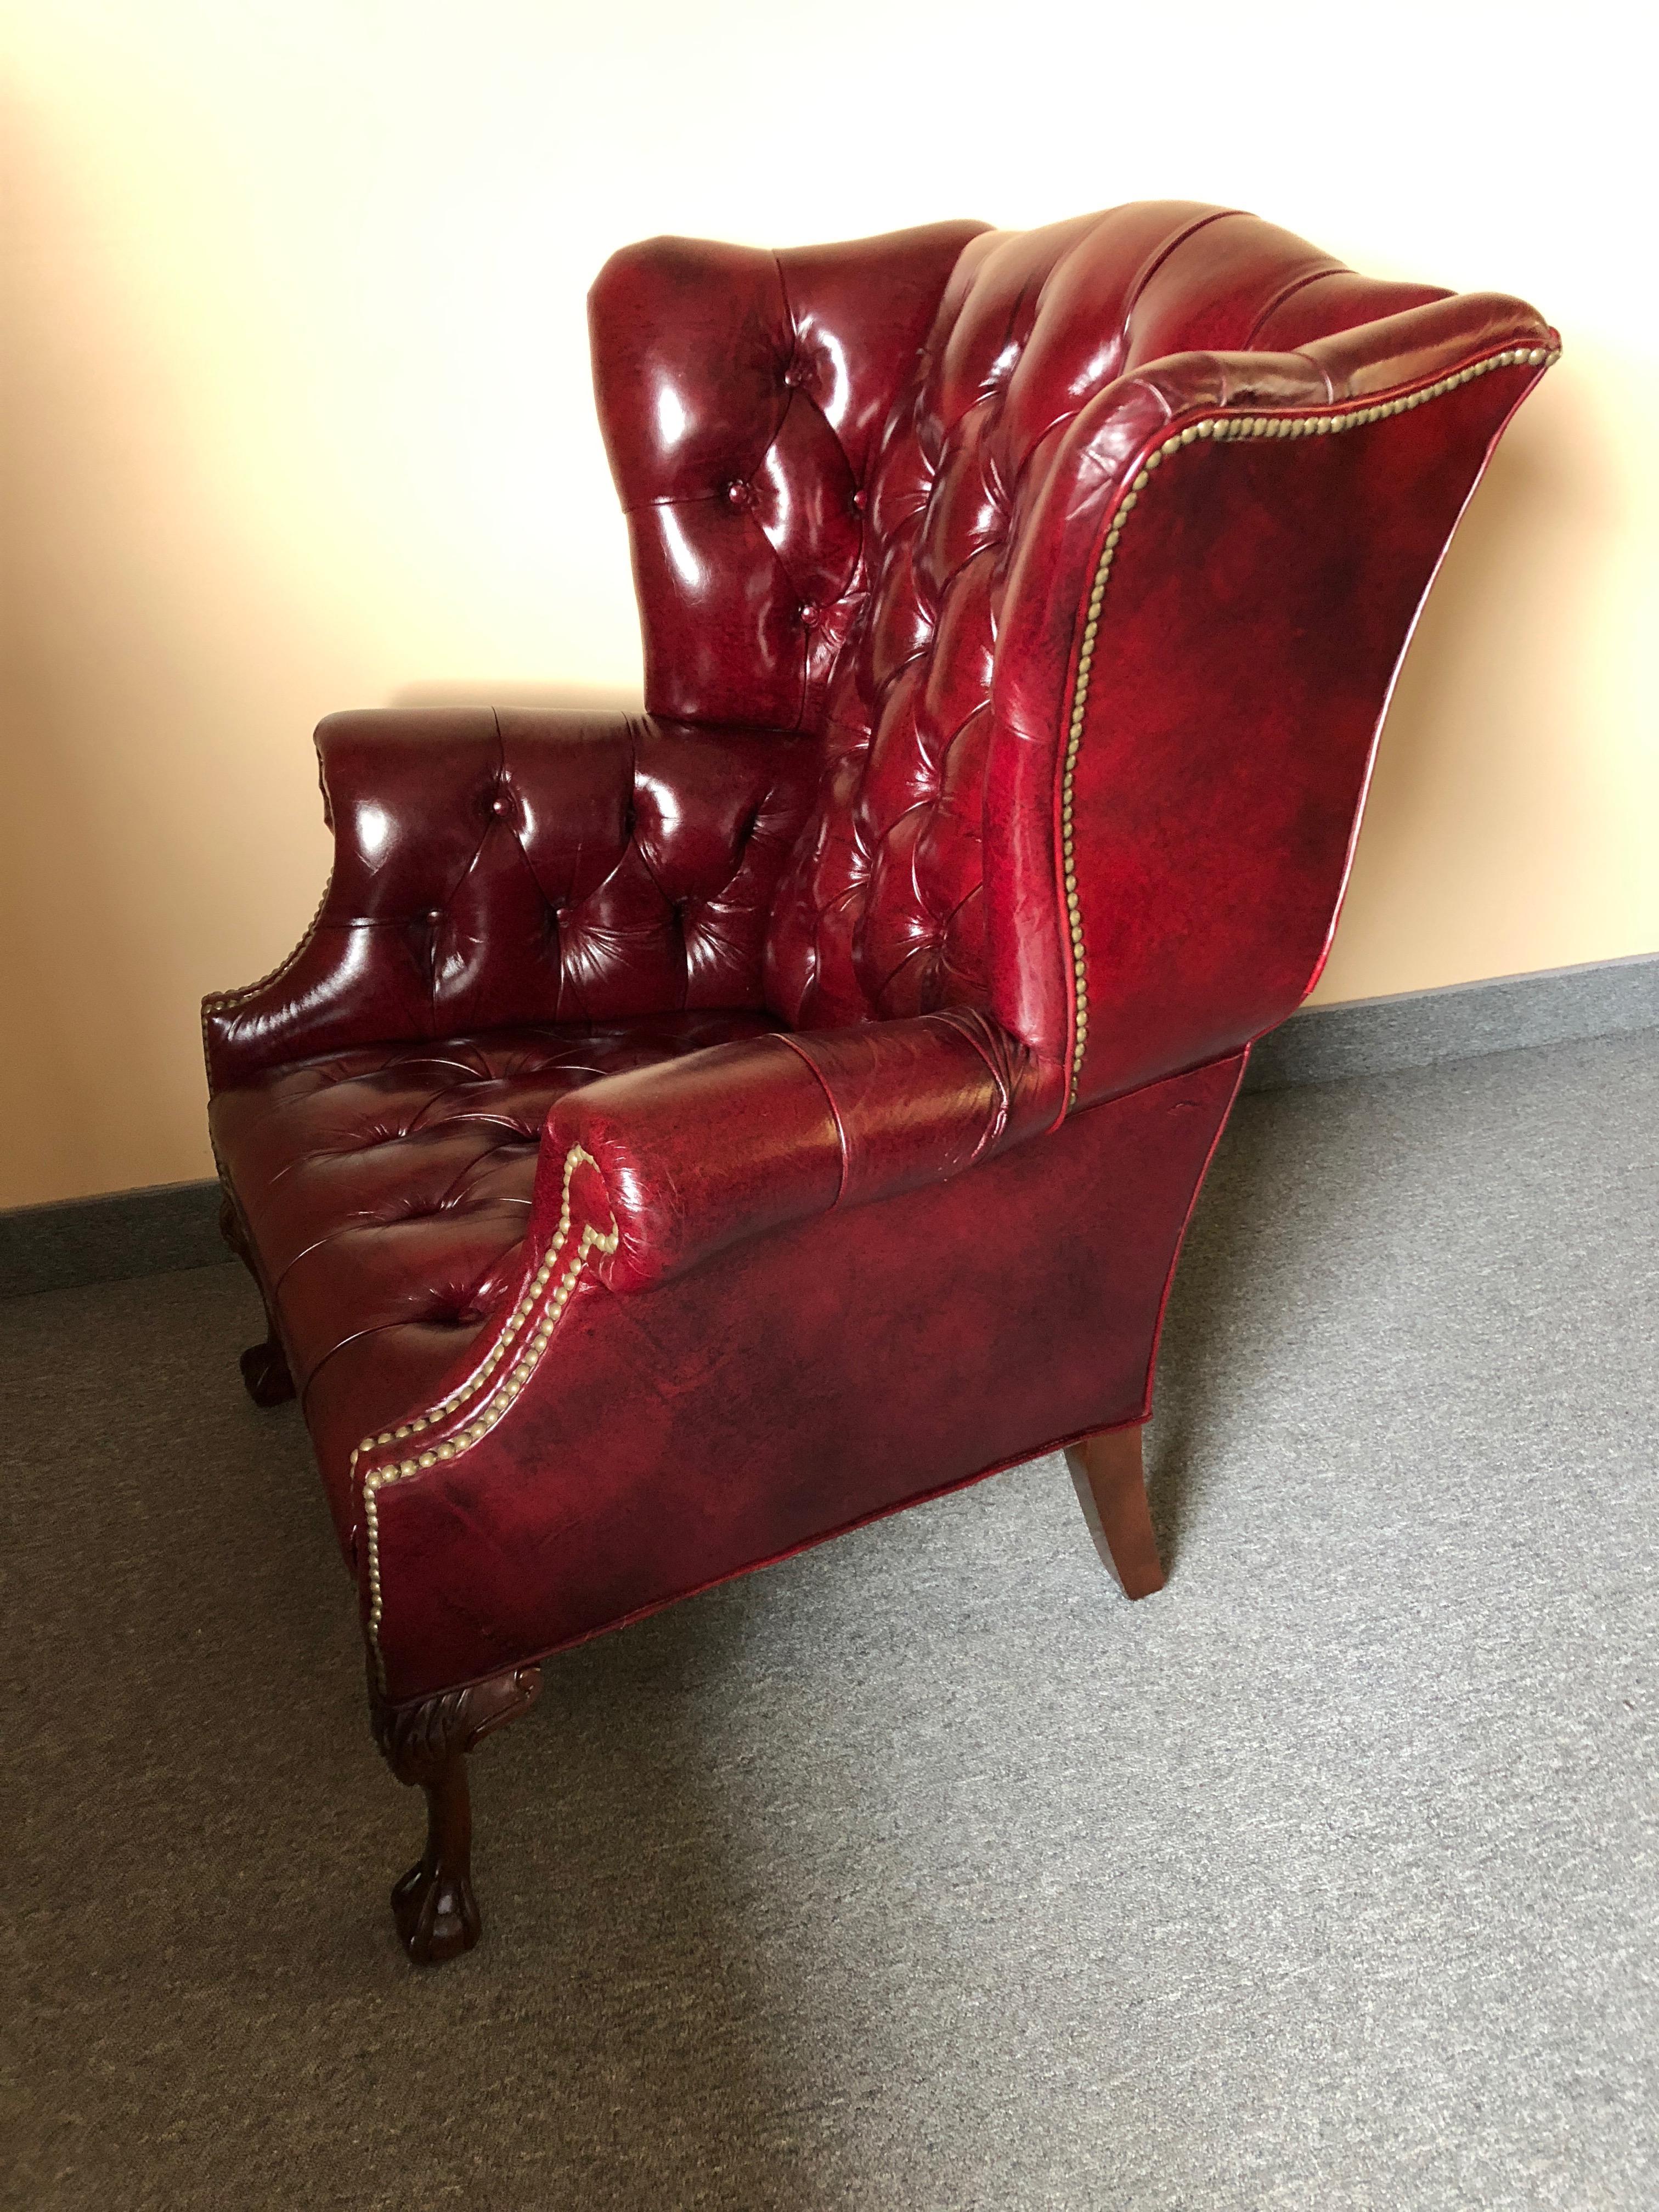 Pair of Rich Burgundy Leather Vintage Tufted Chesterfield Wing Chairs 3